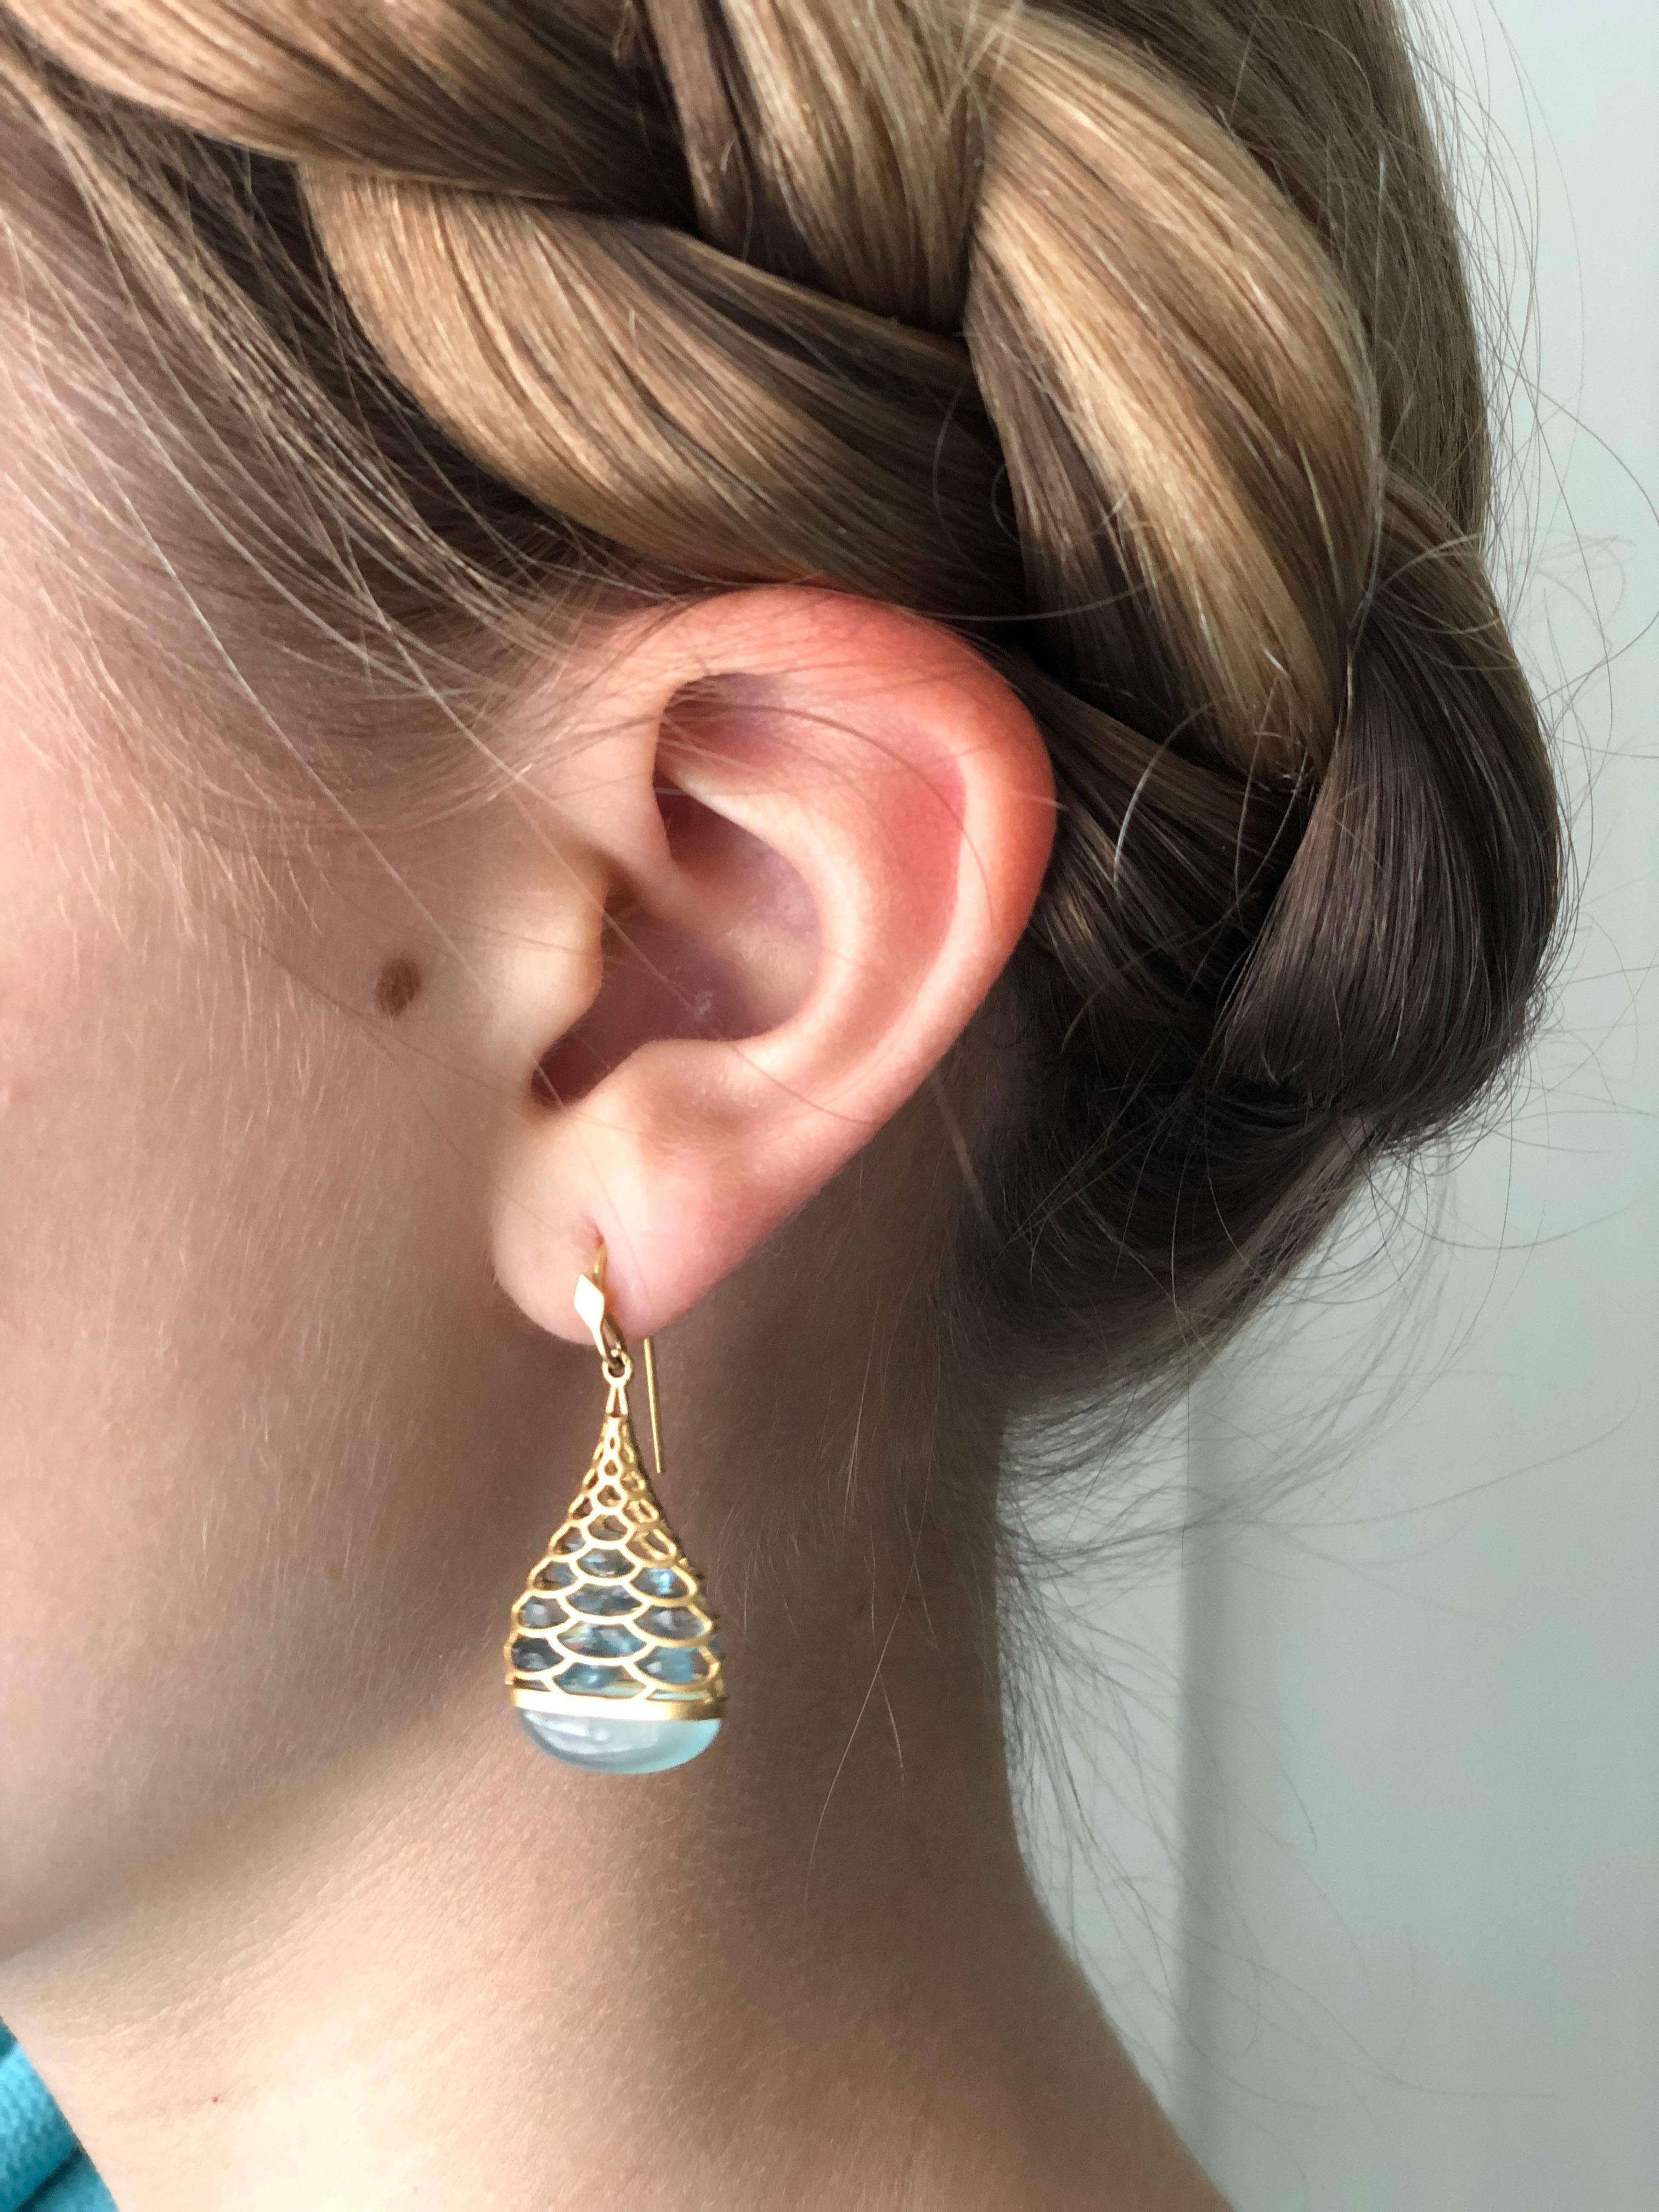 Faceted Aquamarines float inside these 18kt yellow gold teardrop shaped caged earrings, catching the light in a playful and unique mermaid pattern, with a cabachon Chalcedony set at the bottom. Finished in Lauren Harper's signature matte gold